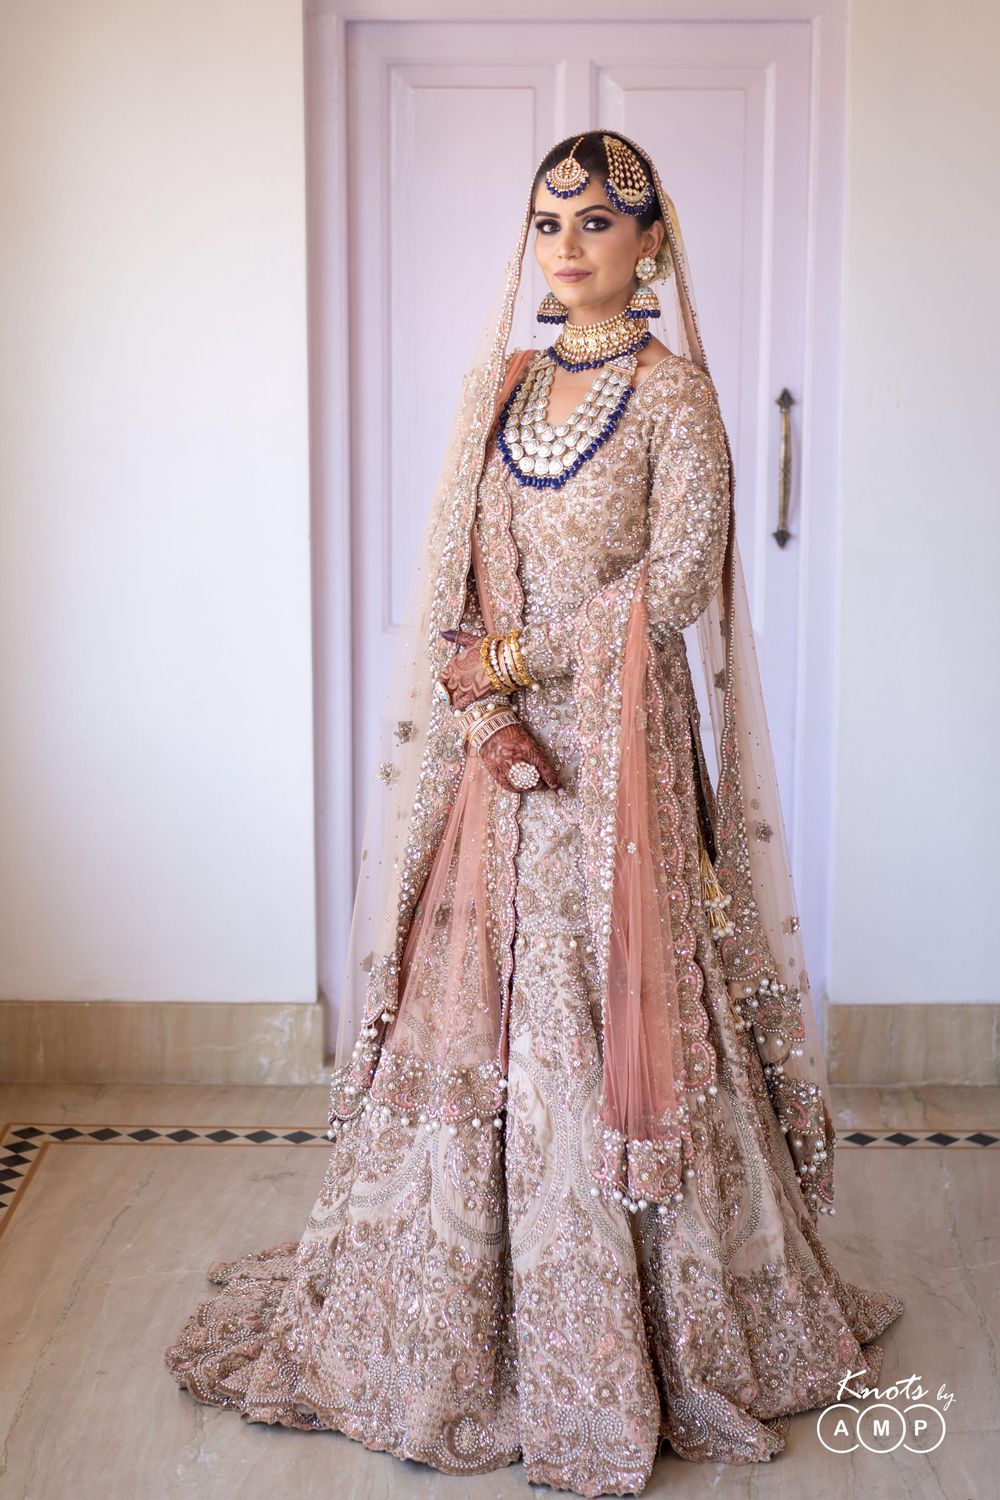 Photo of A beautiful bride in peach bridal heavy sharara and exquisite jewellery with dark blue beads.